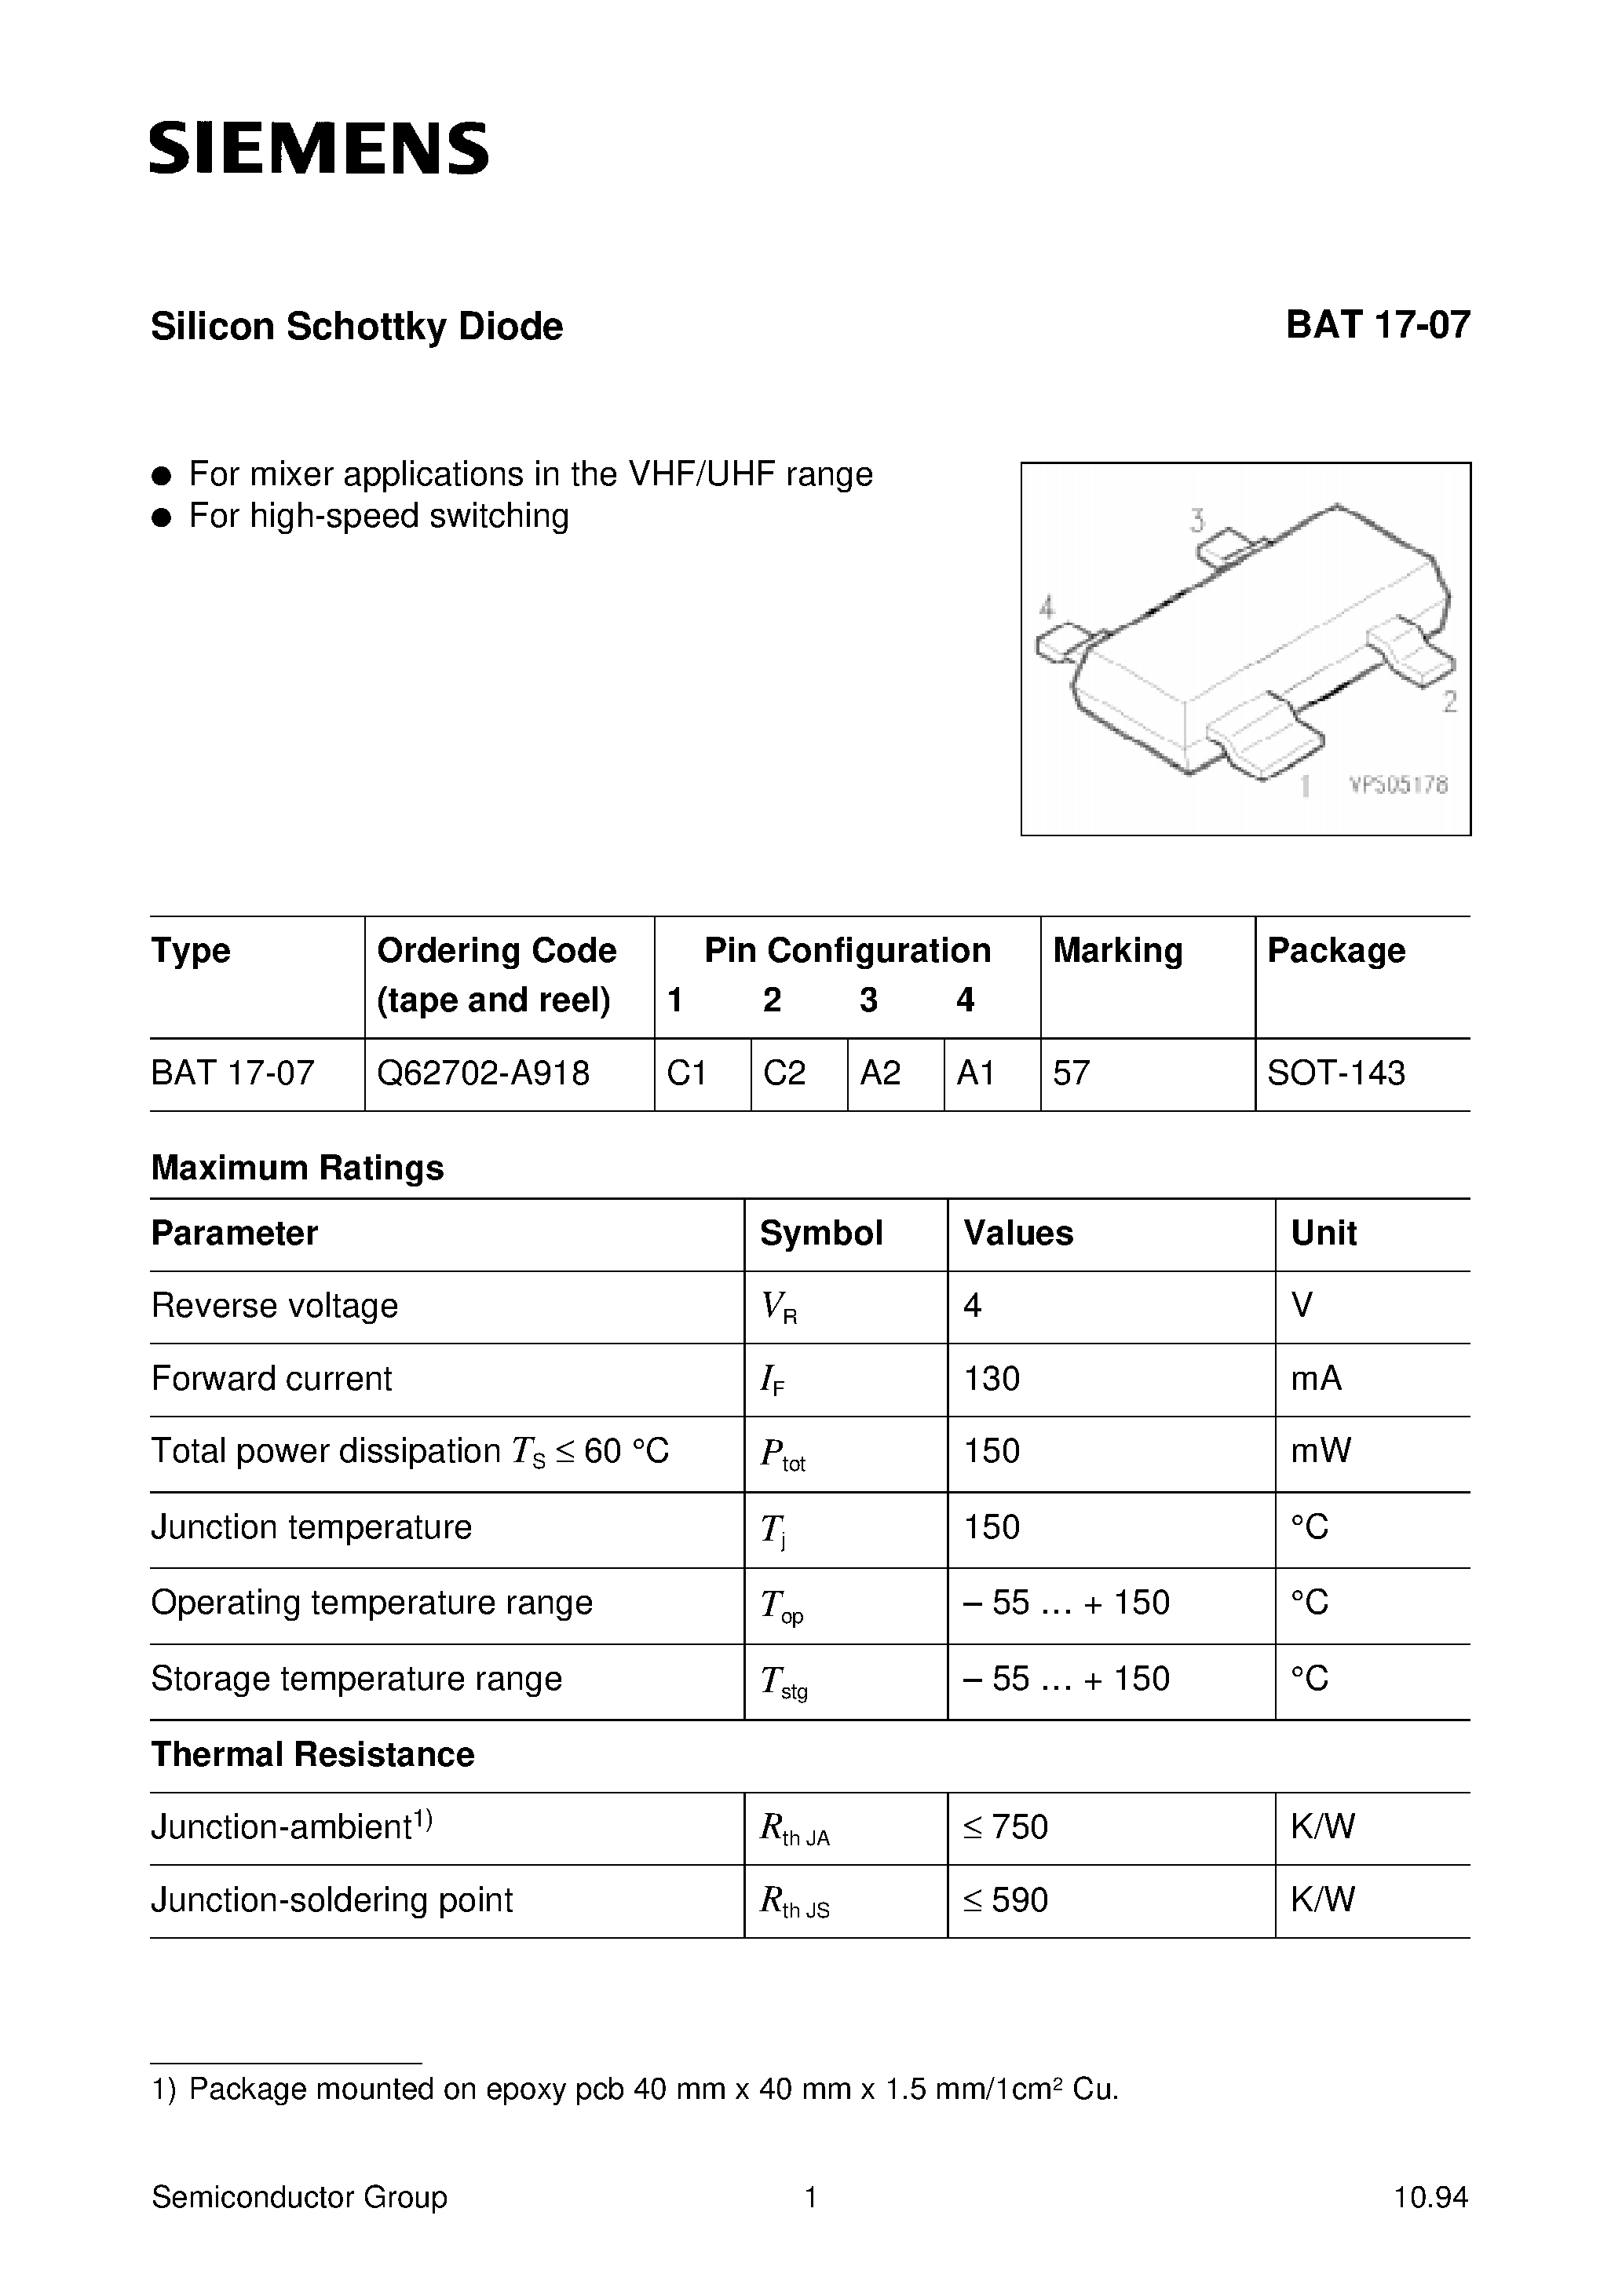 Datasheet BAT17-07 - Silicon Schottky Diode (For mixer applications in the VHF/UHF range For high-speed switching) page 1